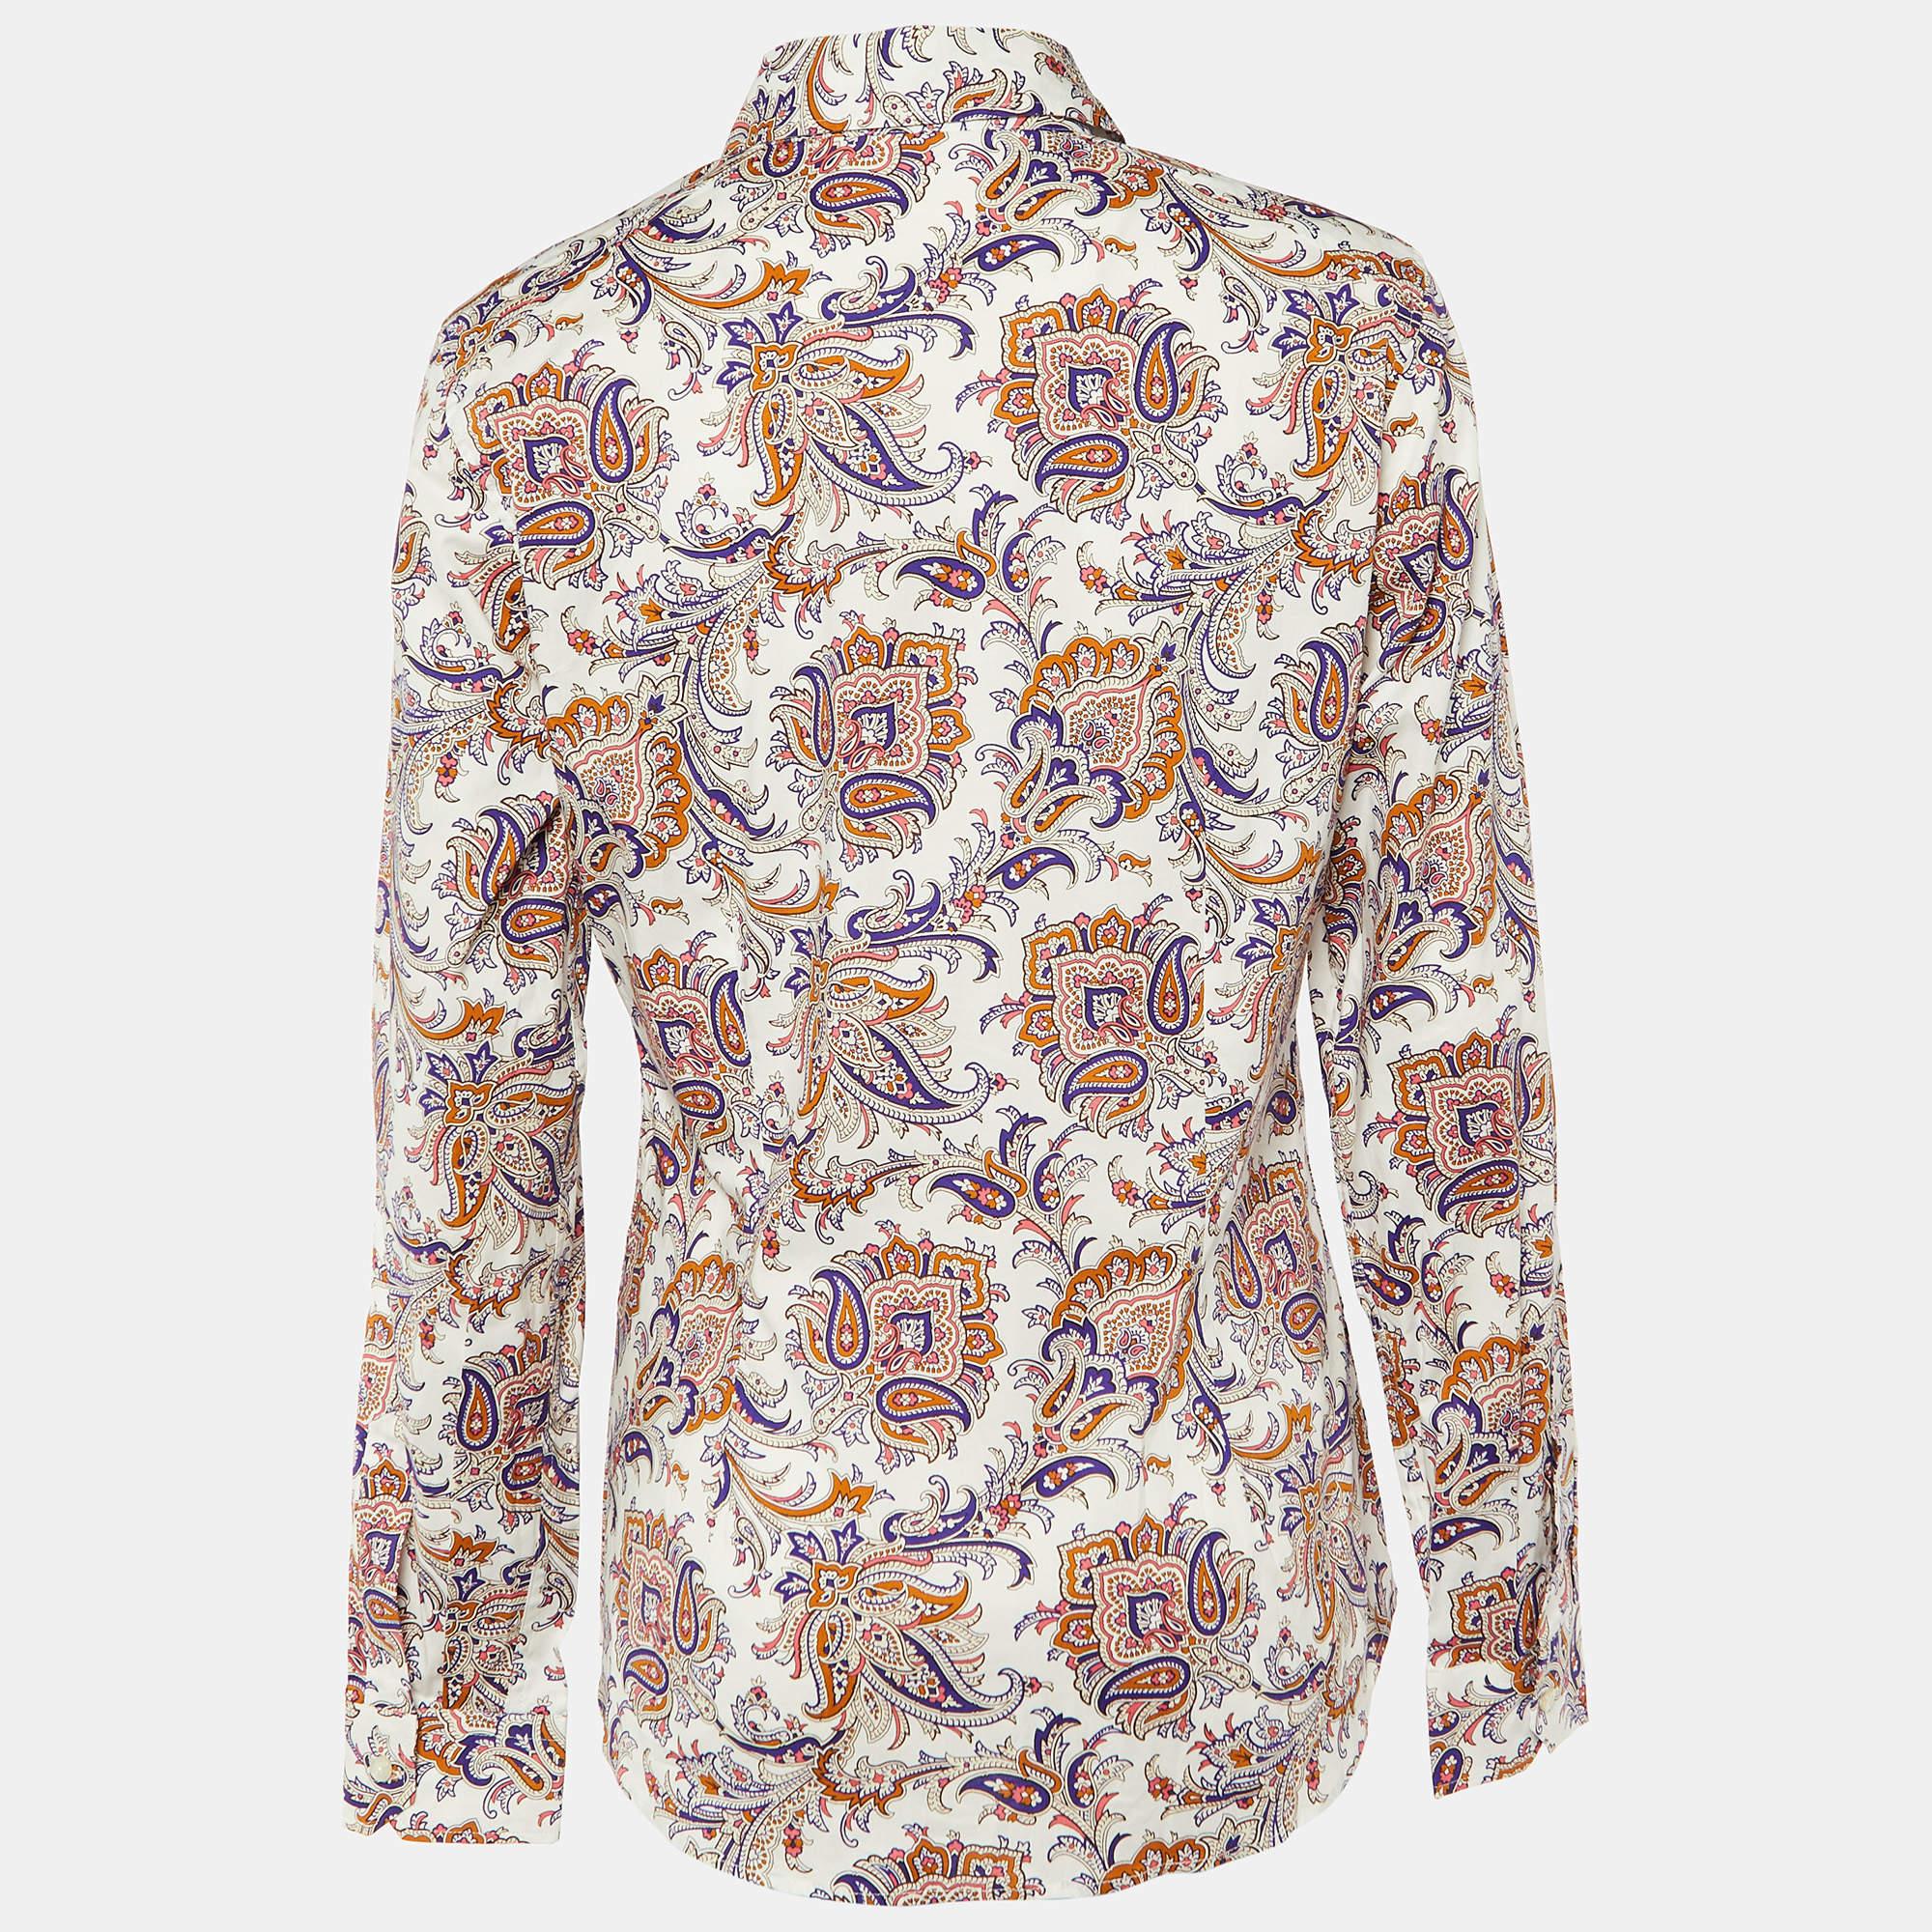 As shirts are an indispensable part of a wardrobe, Etro brings you a creation that is both versatile and stylish. It has been tailored from high-quality fabric for a classy look and fit.

